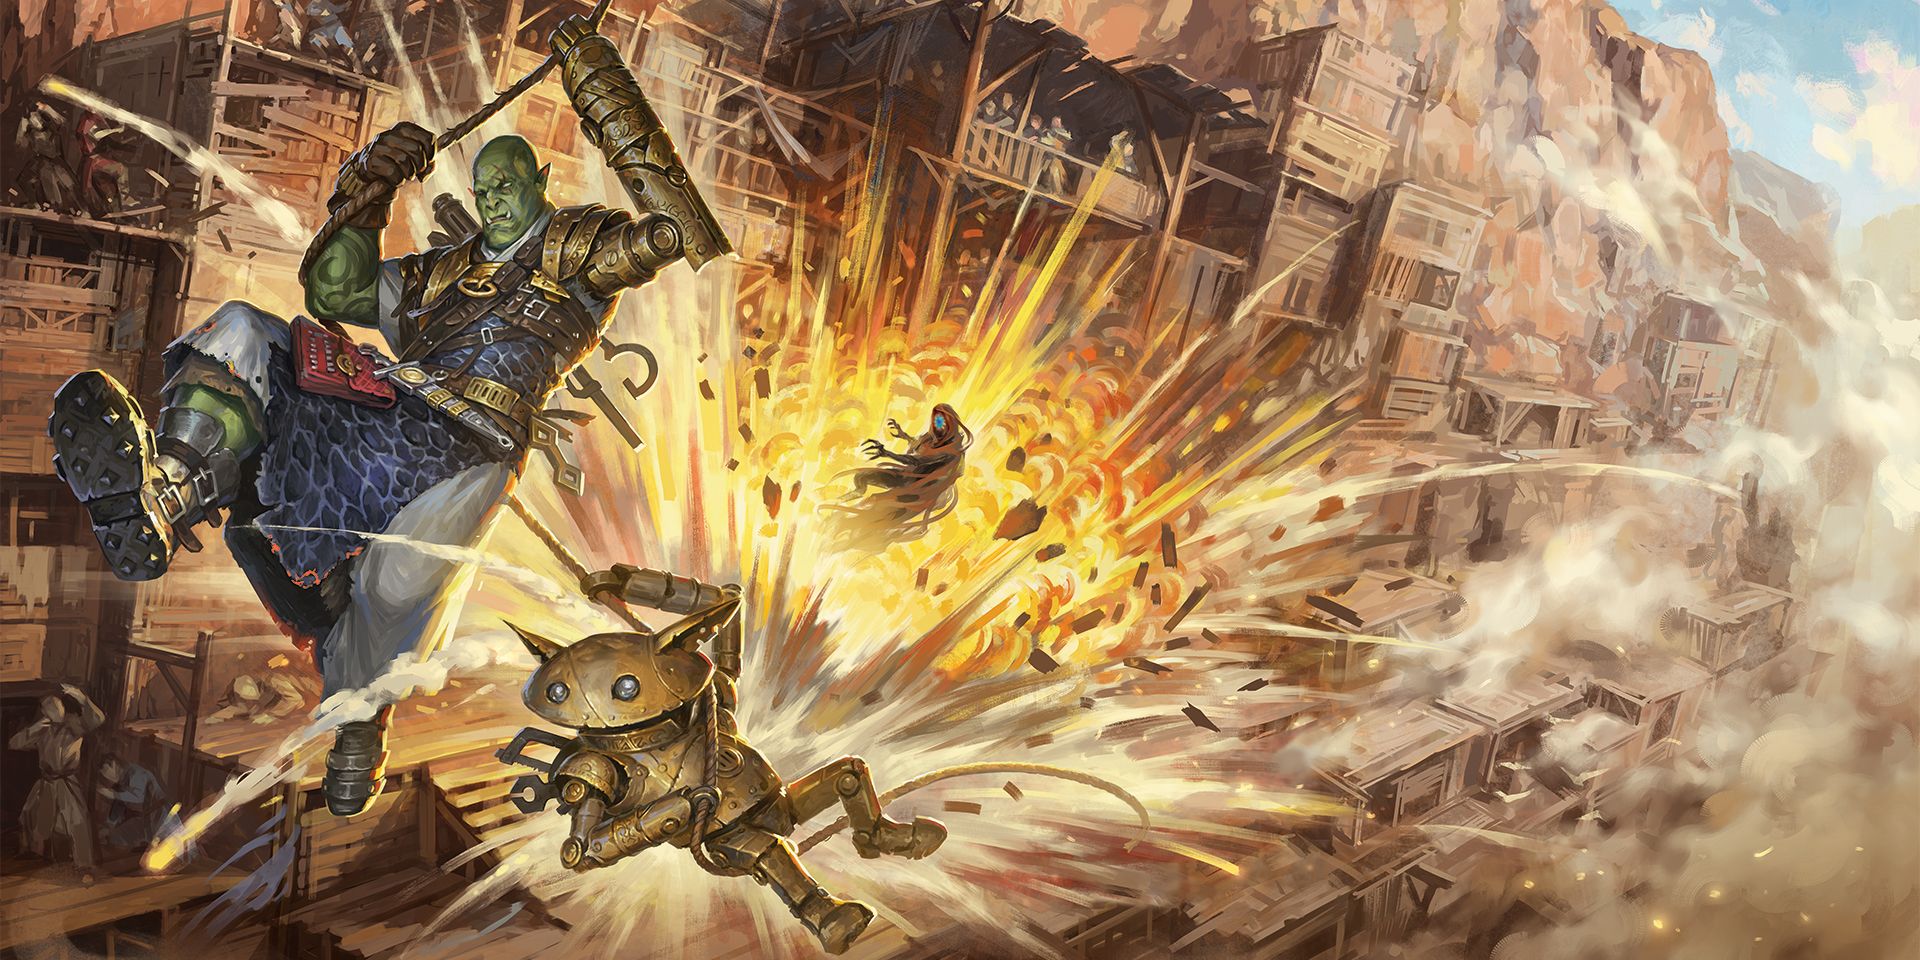 An orc and a small, mechanized creature escape from an explosion by swinging on a rope in the Pathfinder Adventure Path Outlaws of Alkenstar while a cloaked, clawed creature is caught in the middle of it